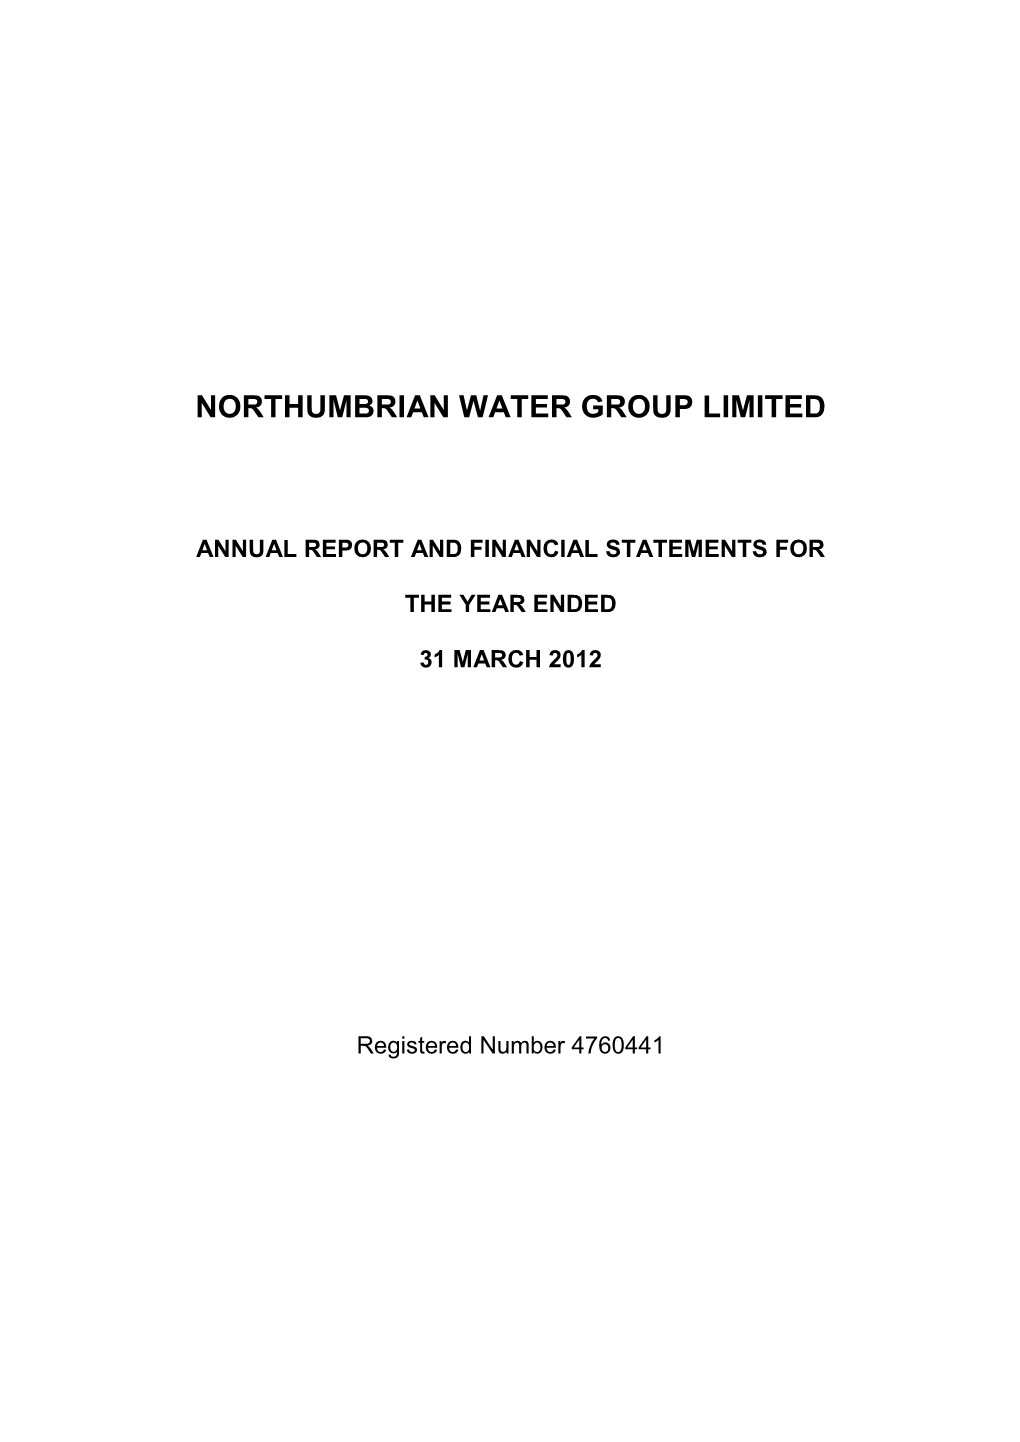 Northumbrian Water Group Limited Annual Report and Financial